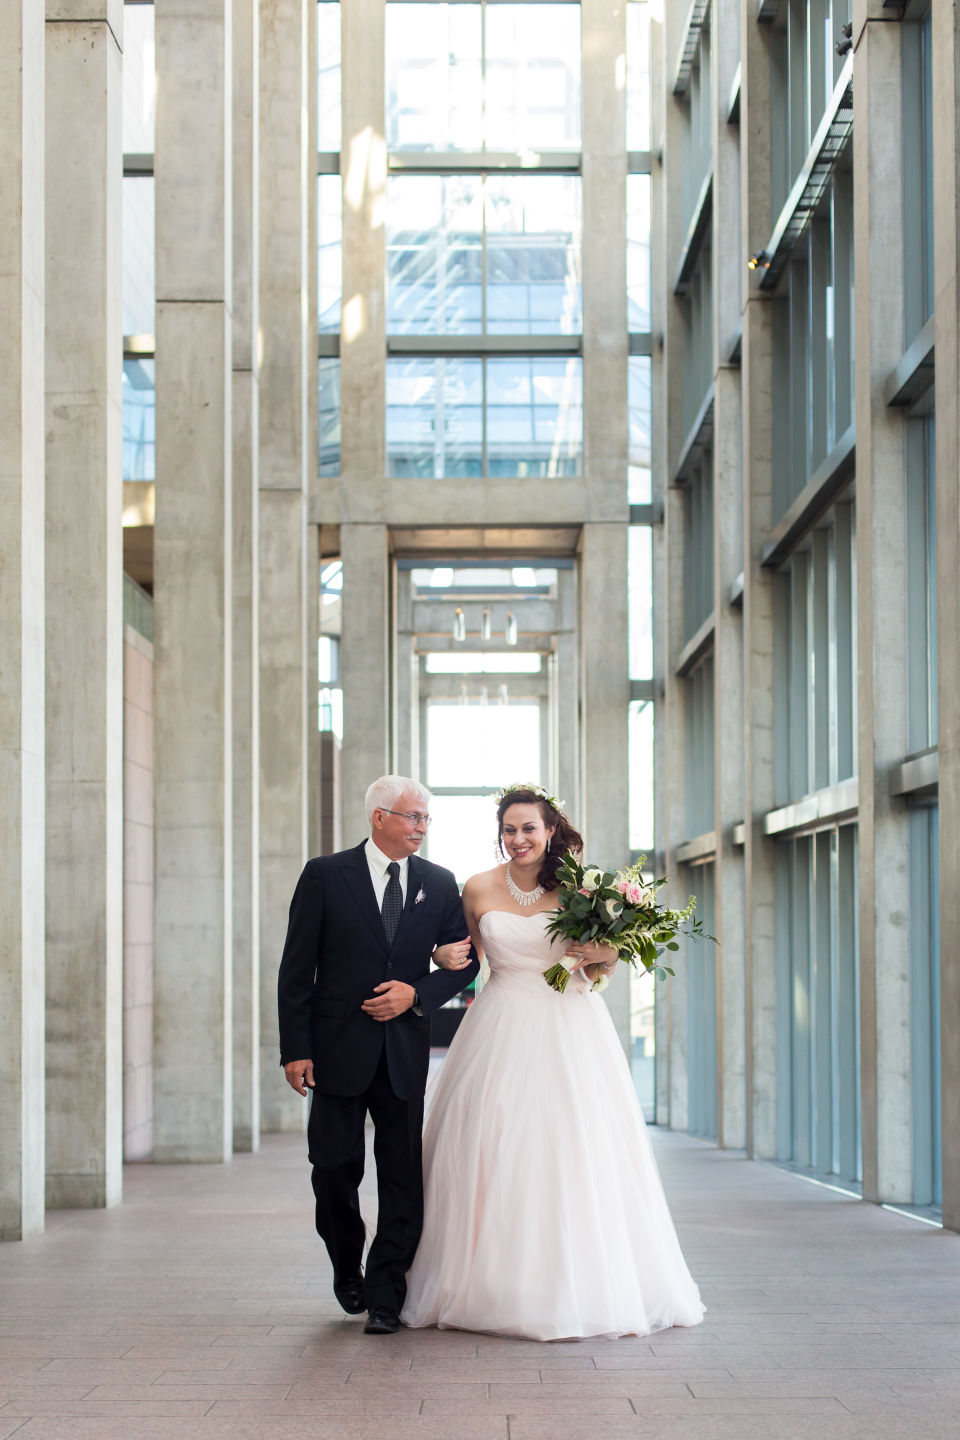 National Gallery of Canada - Union Eleven - Erica Irwin Weddings and Events